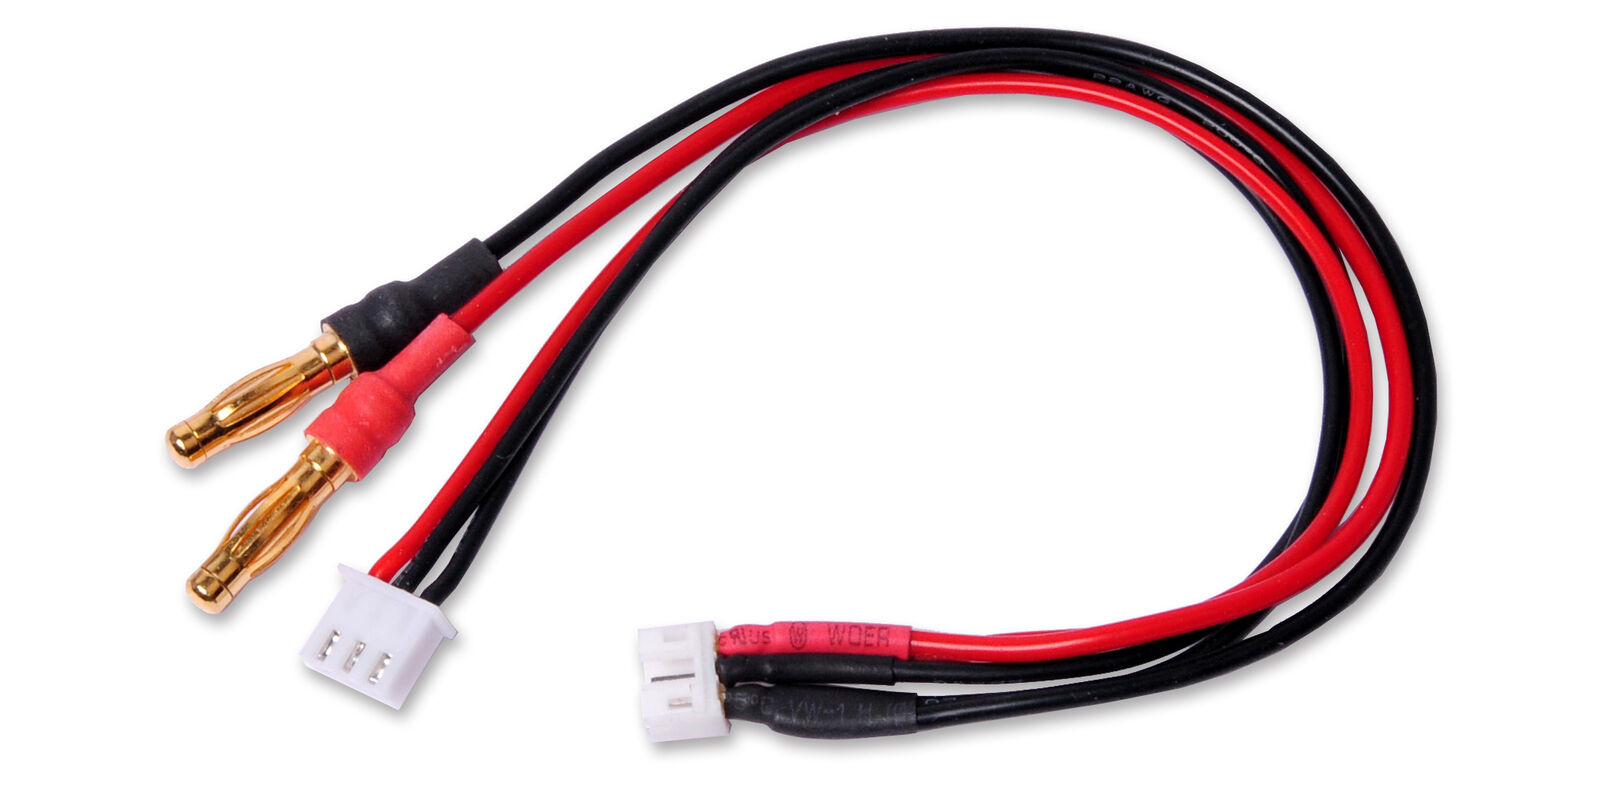 Charge & Balance Cable for UMX 2S Packs, 4mm Charger Plugs